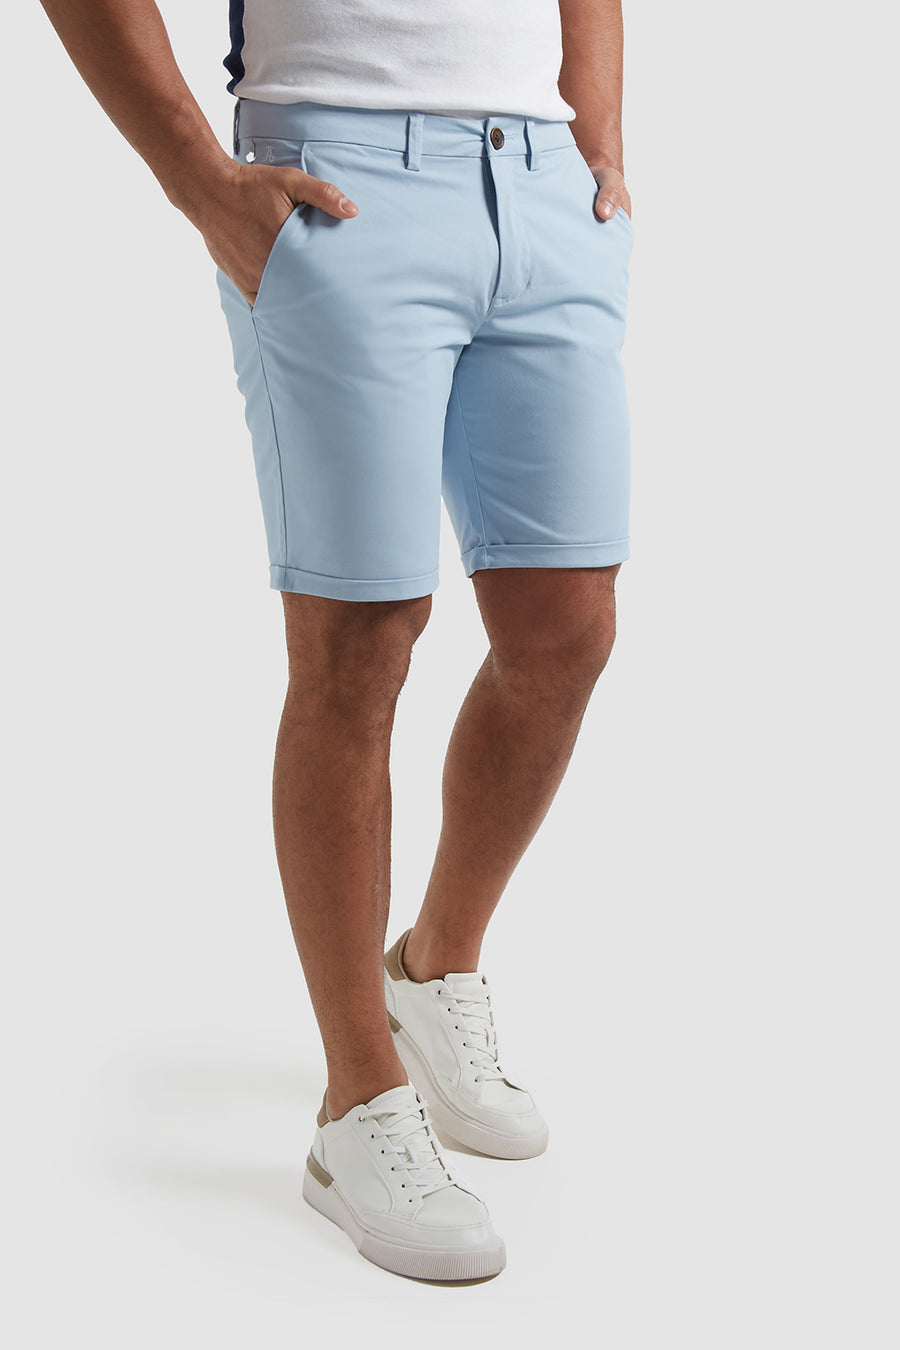 Navy Chino Shorts ATHLETE Athletic TAILORED in - - Fit USA